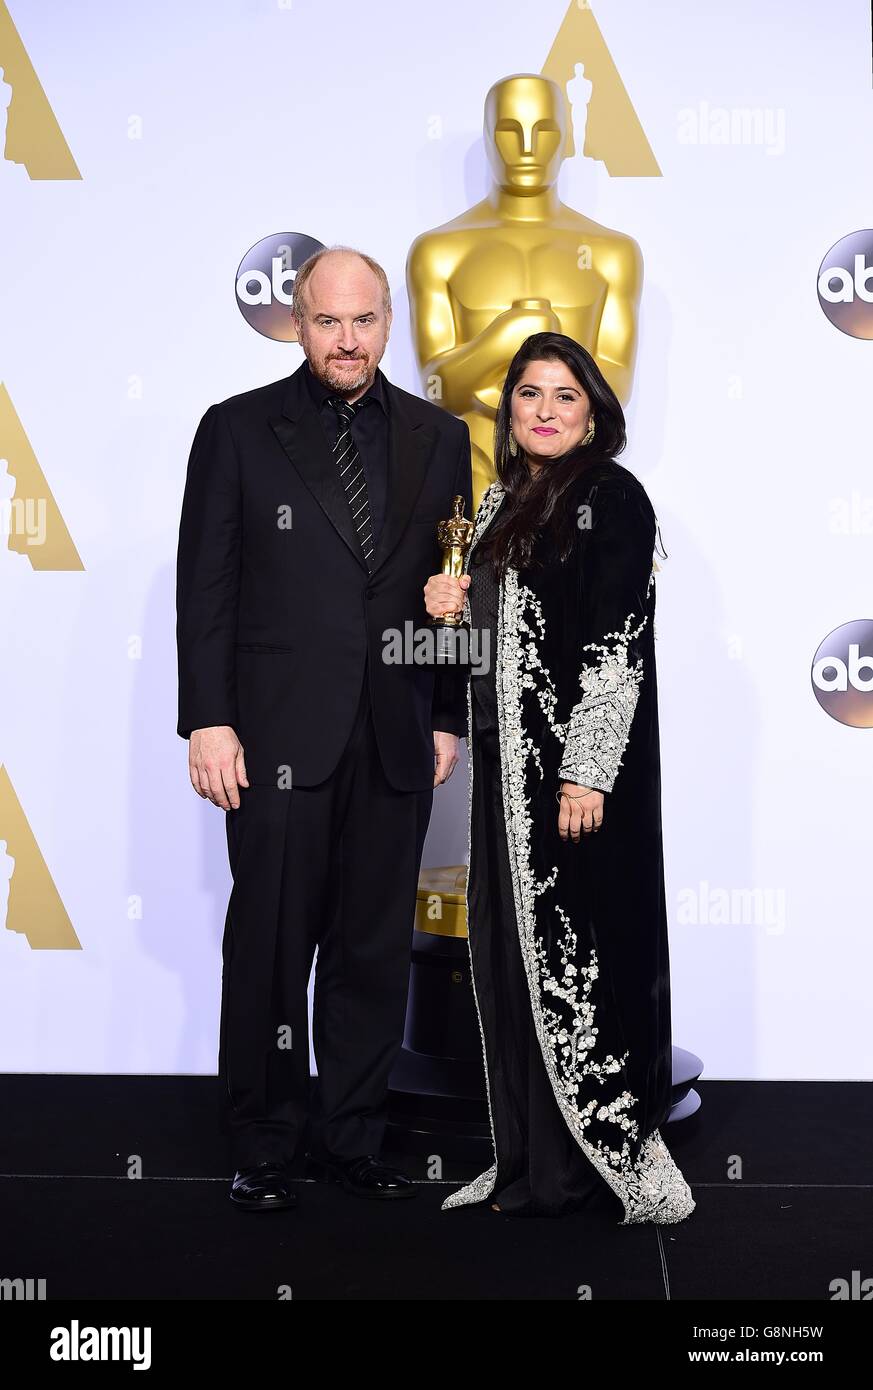 Louis CK presents Documentary Short at the 2016 Academy Awards